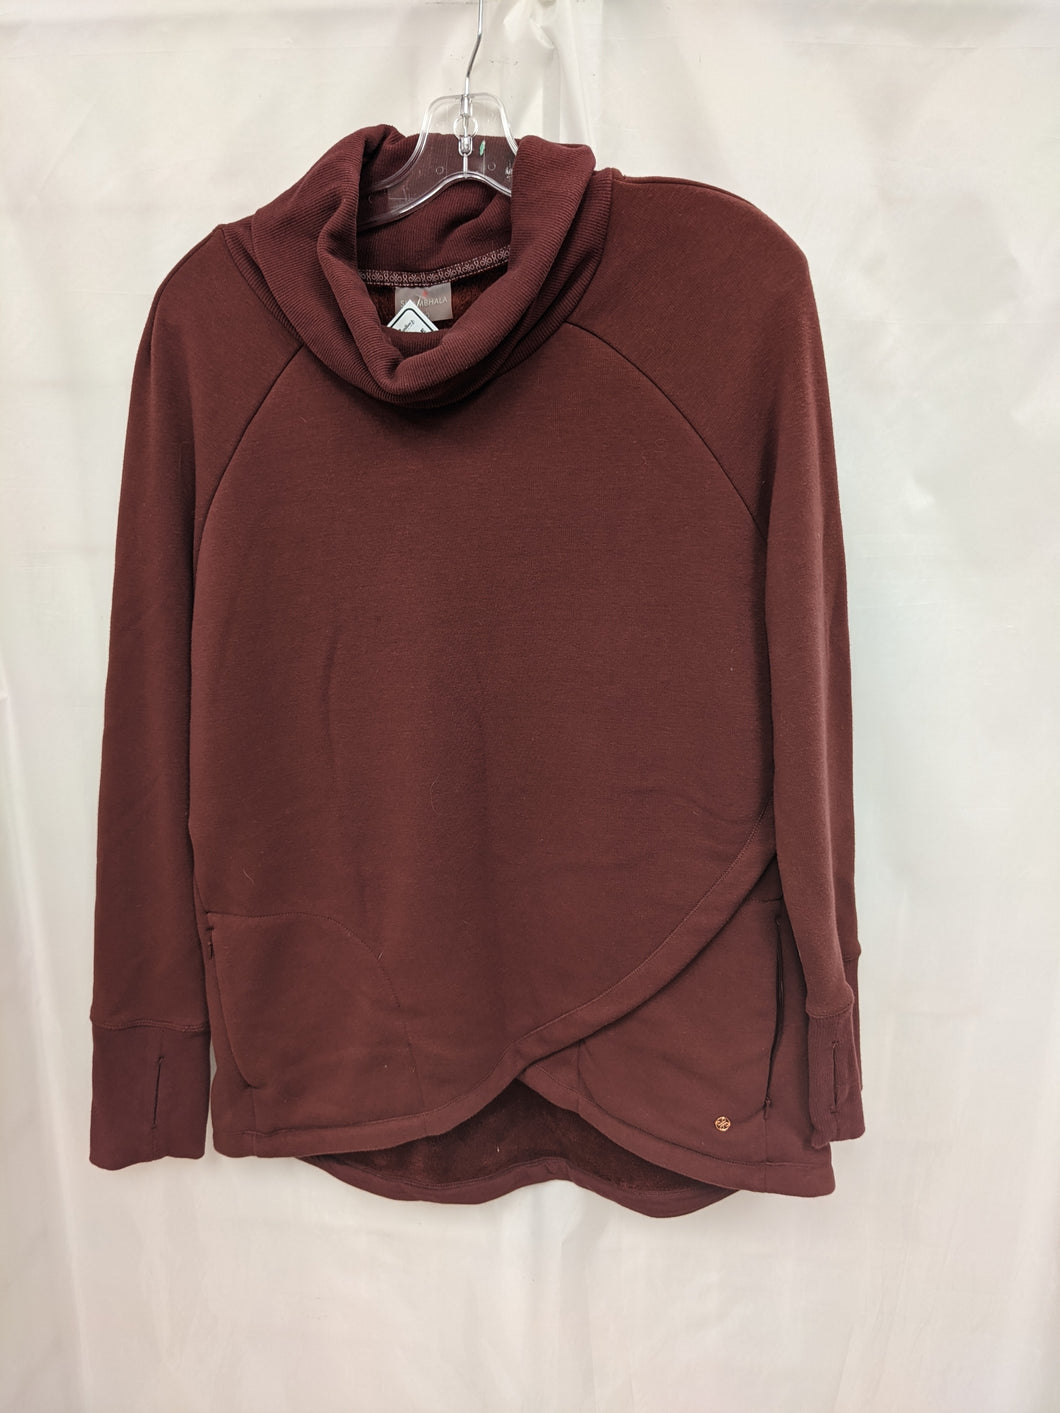 Long Sleeve Top - Size L